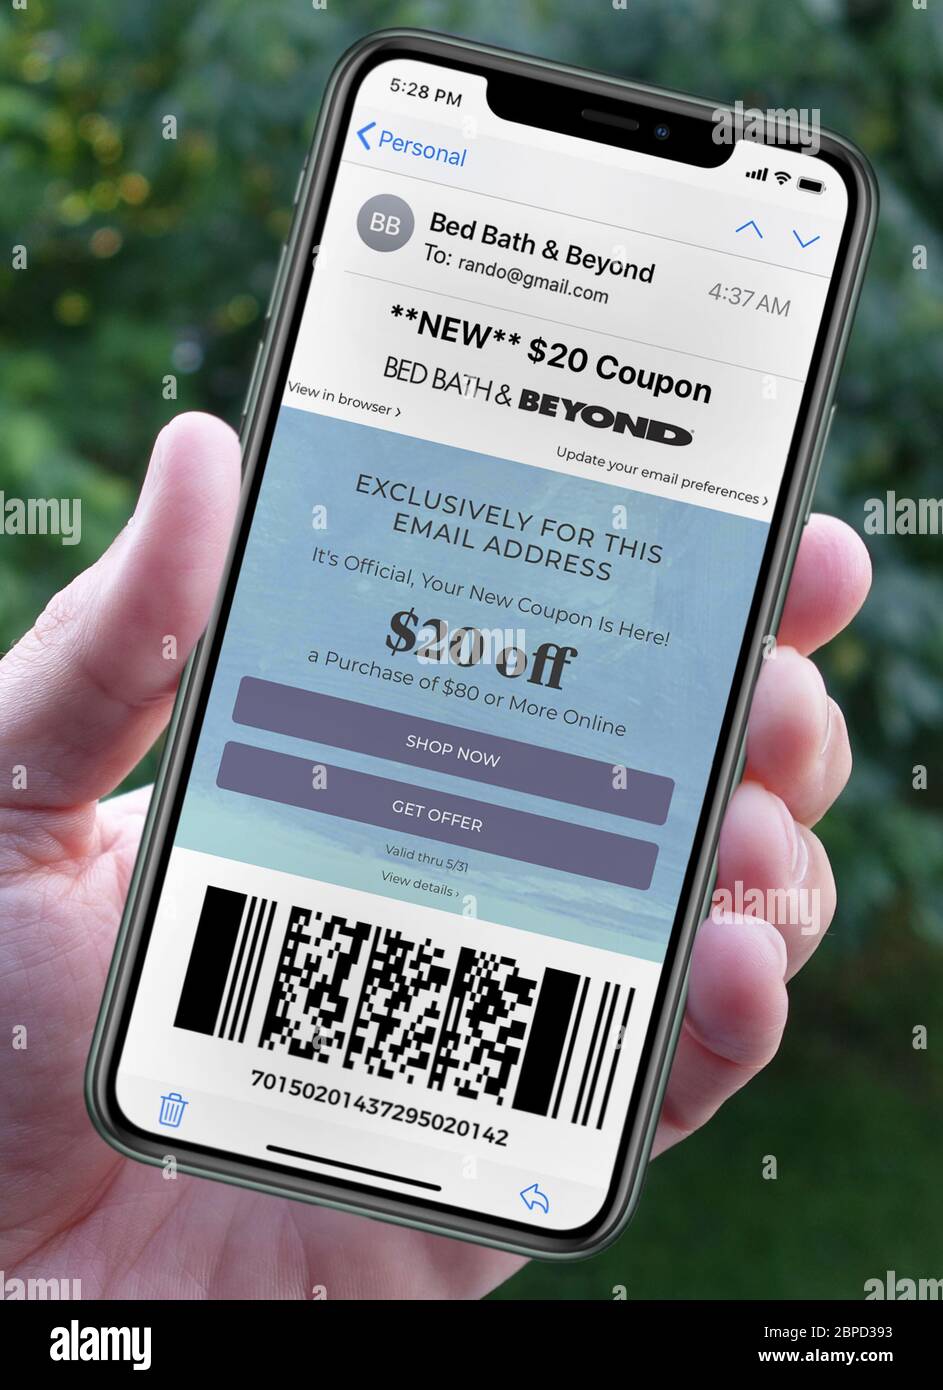 Photo illustration of a Bed Bath & Beyond coupon arriving on a smartphone via email (includes scanable QR code). Bed Bath & Beyond Inc. is an American chain of domestic merchandise retail stores that operates stores in the United States, Canada, and Mexico. It was founded in 1971. Stock Photo